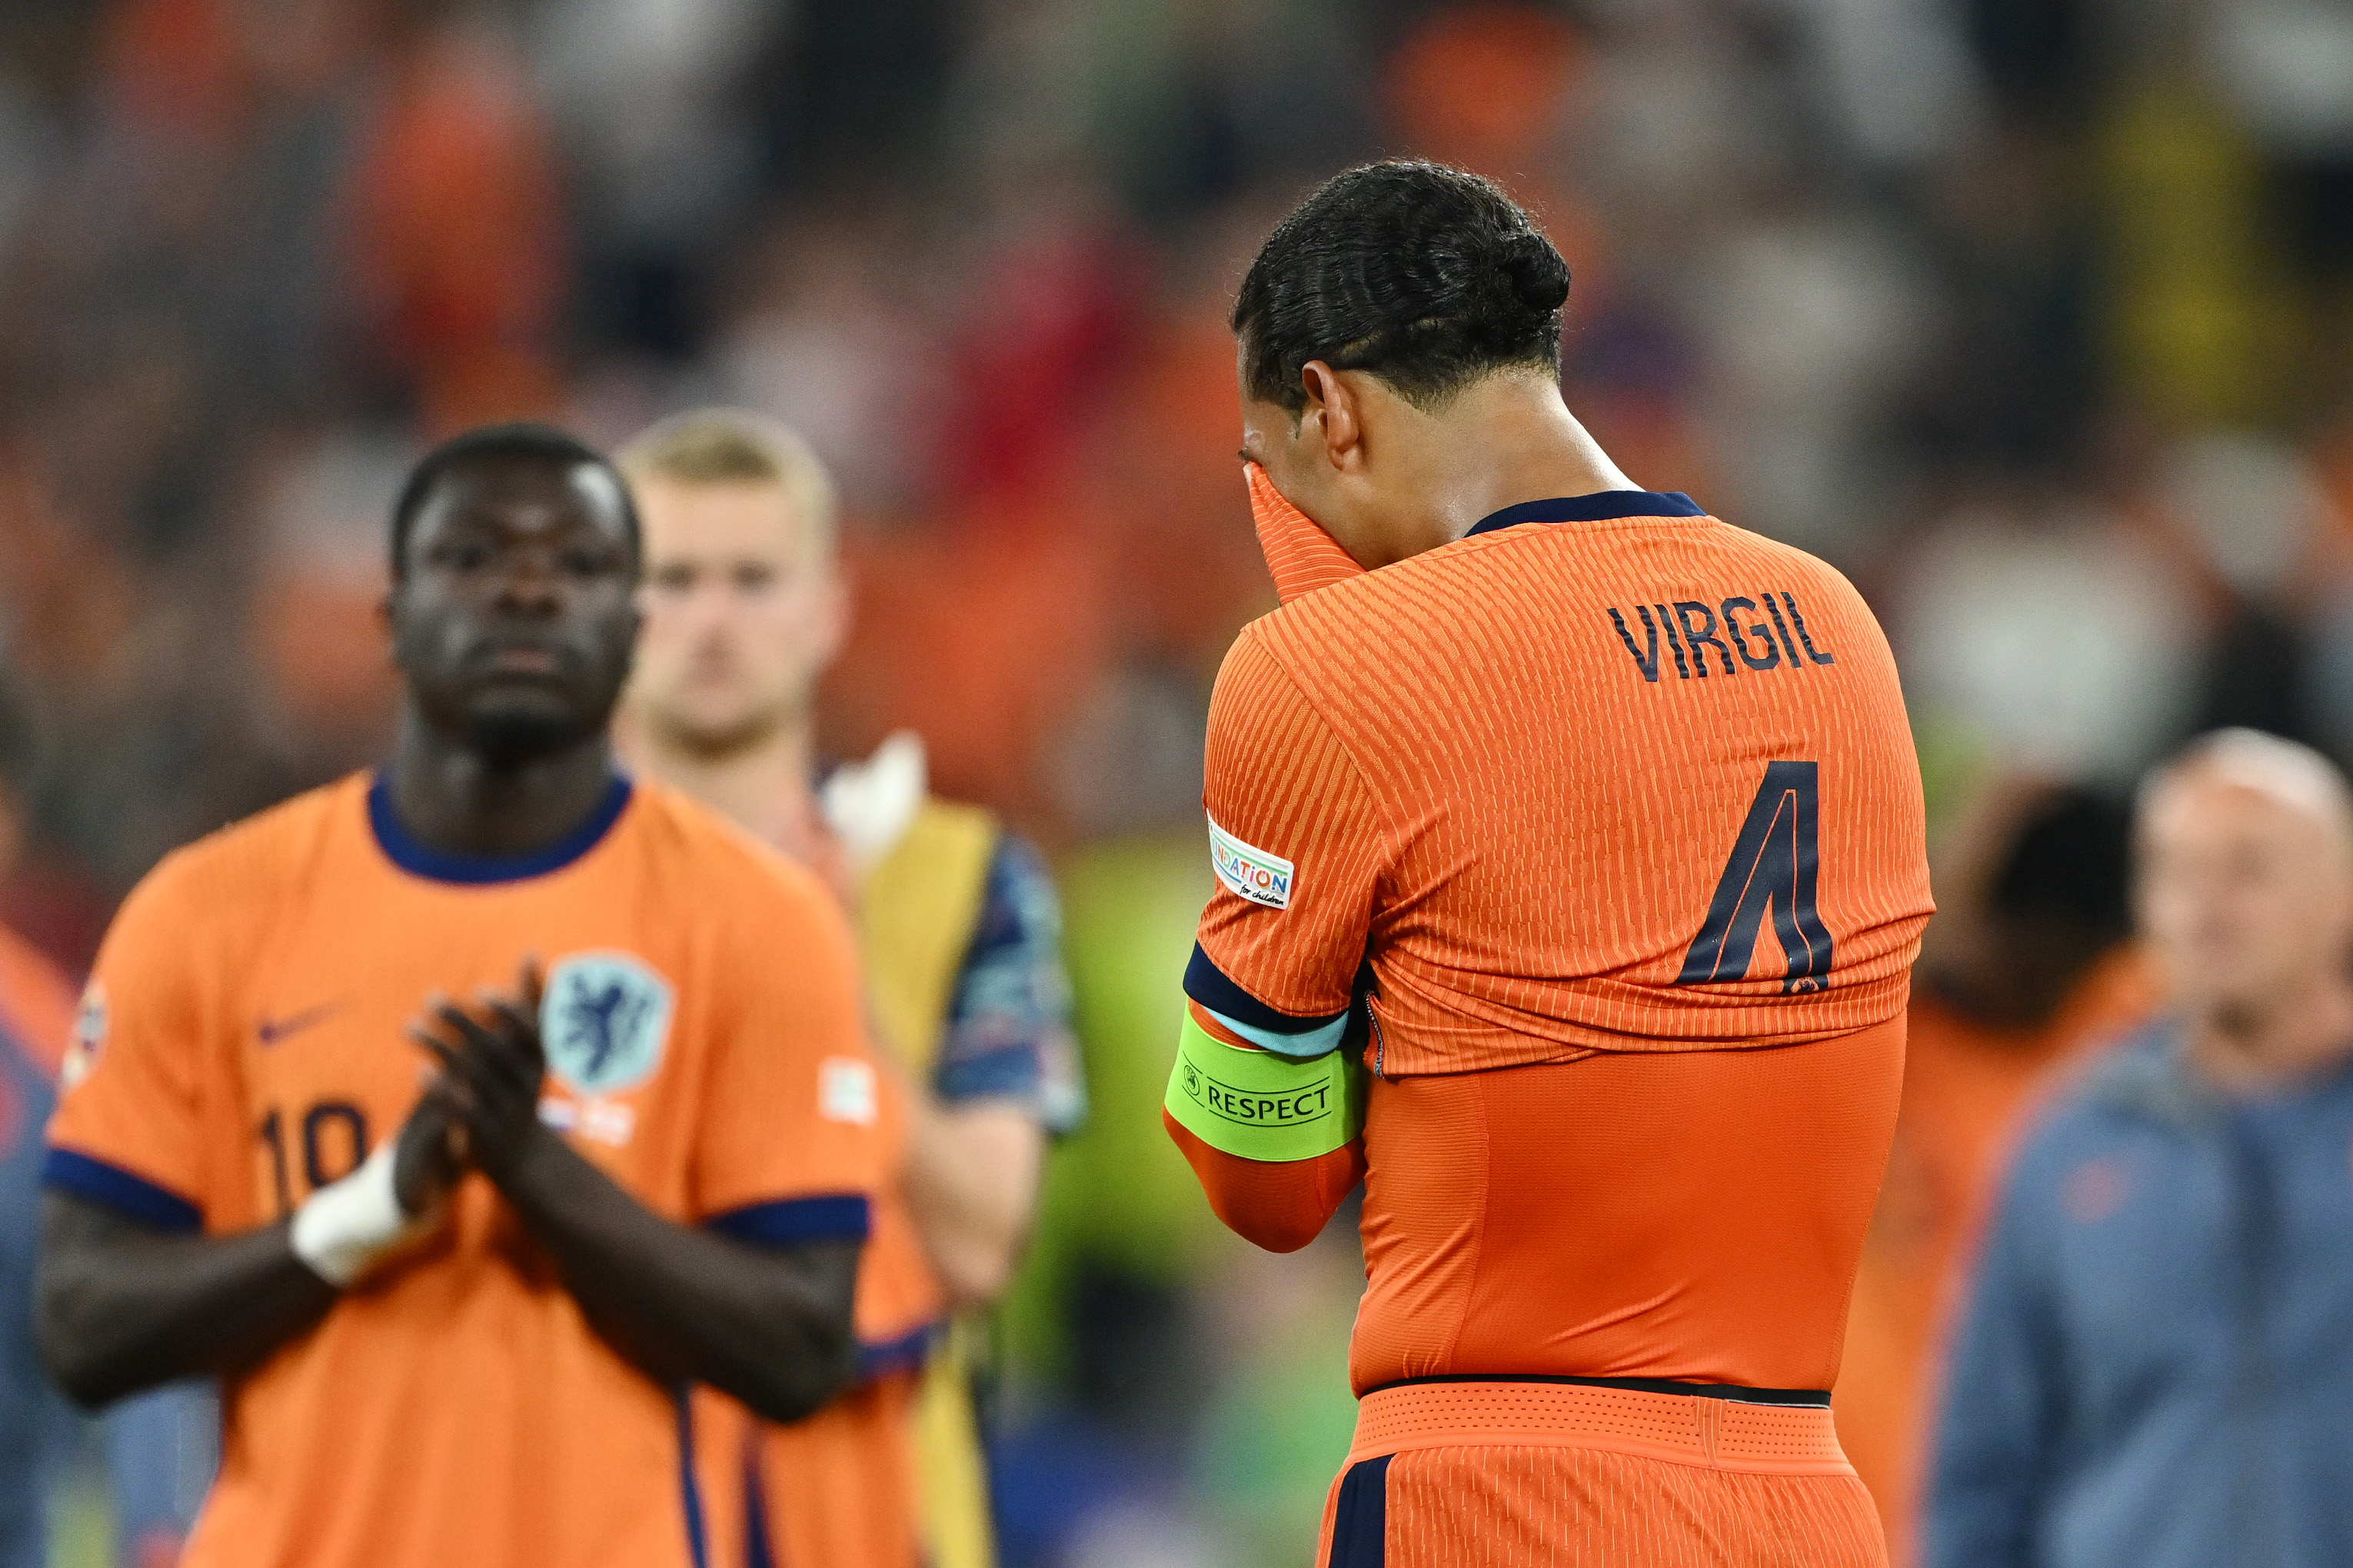 ‘I will think carefully…’ – Virgil van Dijk’s comments on his future may concern Liverpool fans